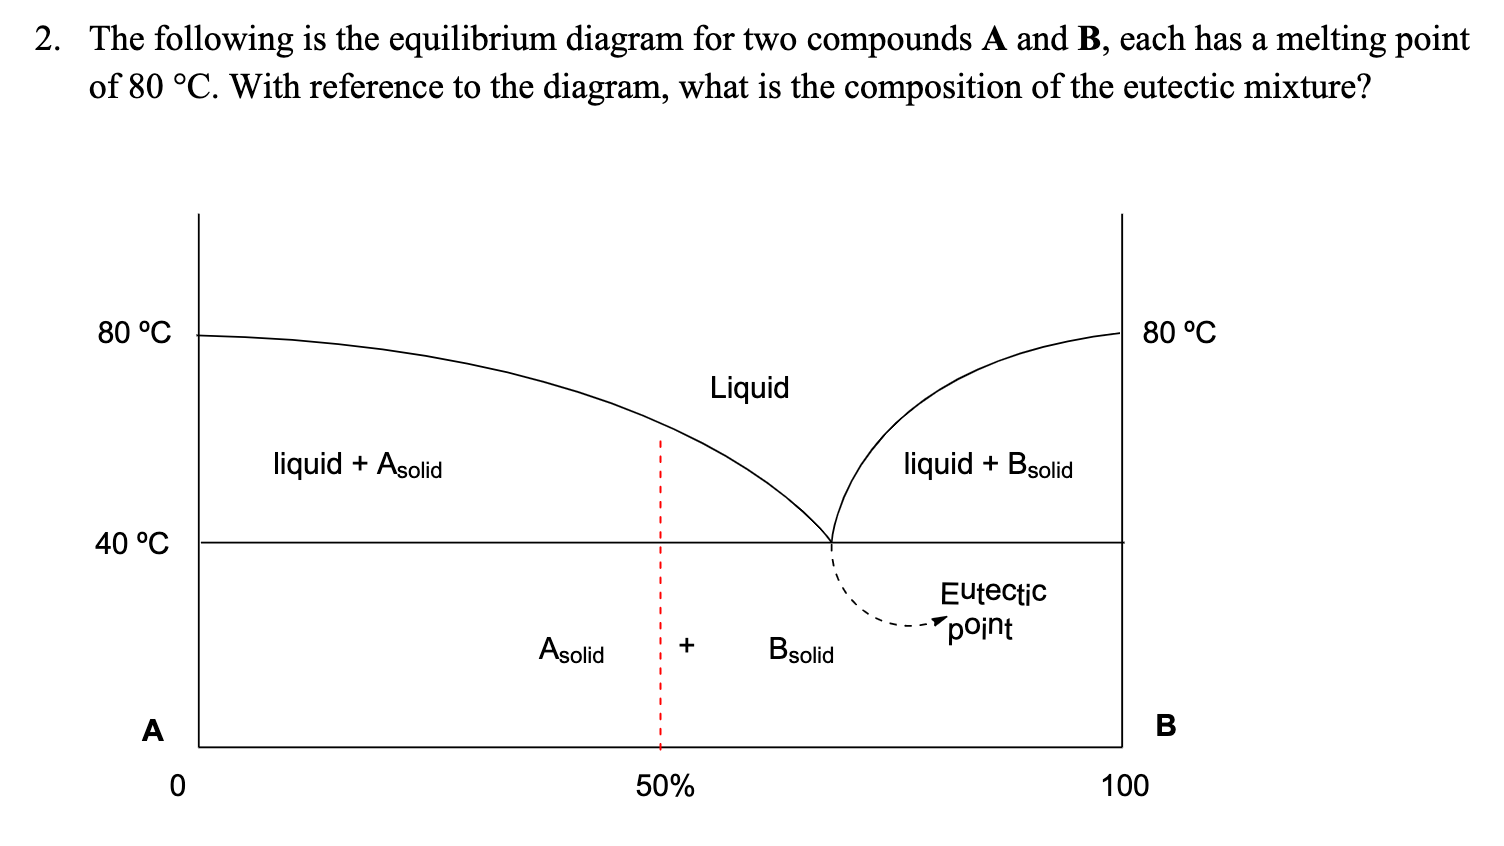 2. The following is the equilibrium diagram for two compounds A and B, each has a melting point
of 80 °C. With reference to the diagram, what is the composition of the eutectic mixture?
